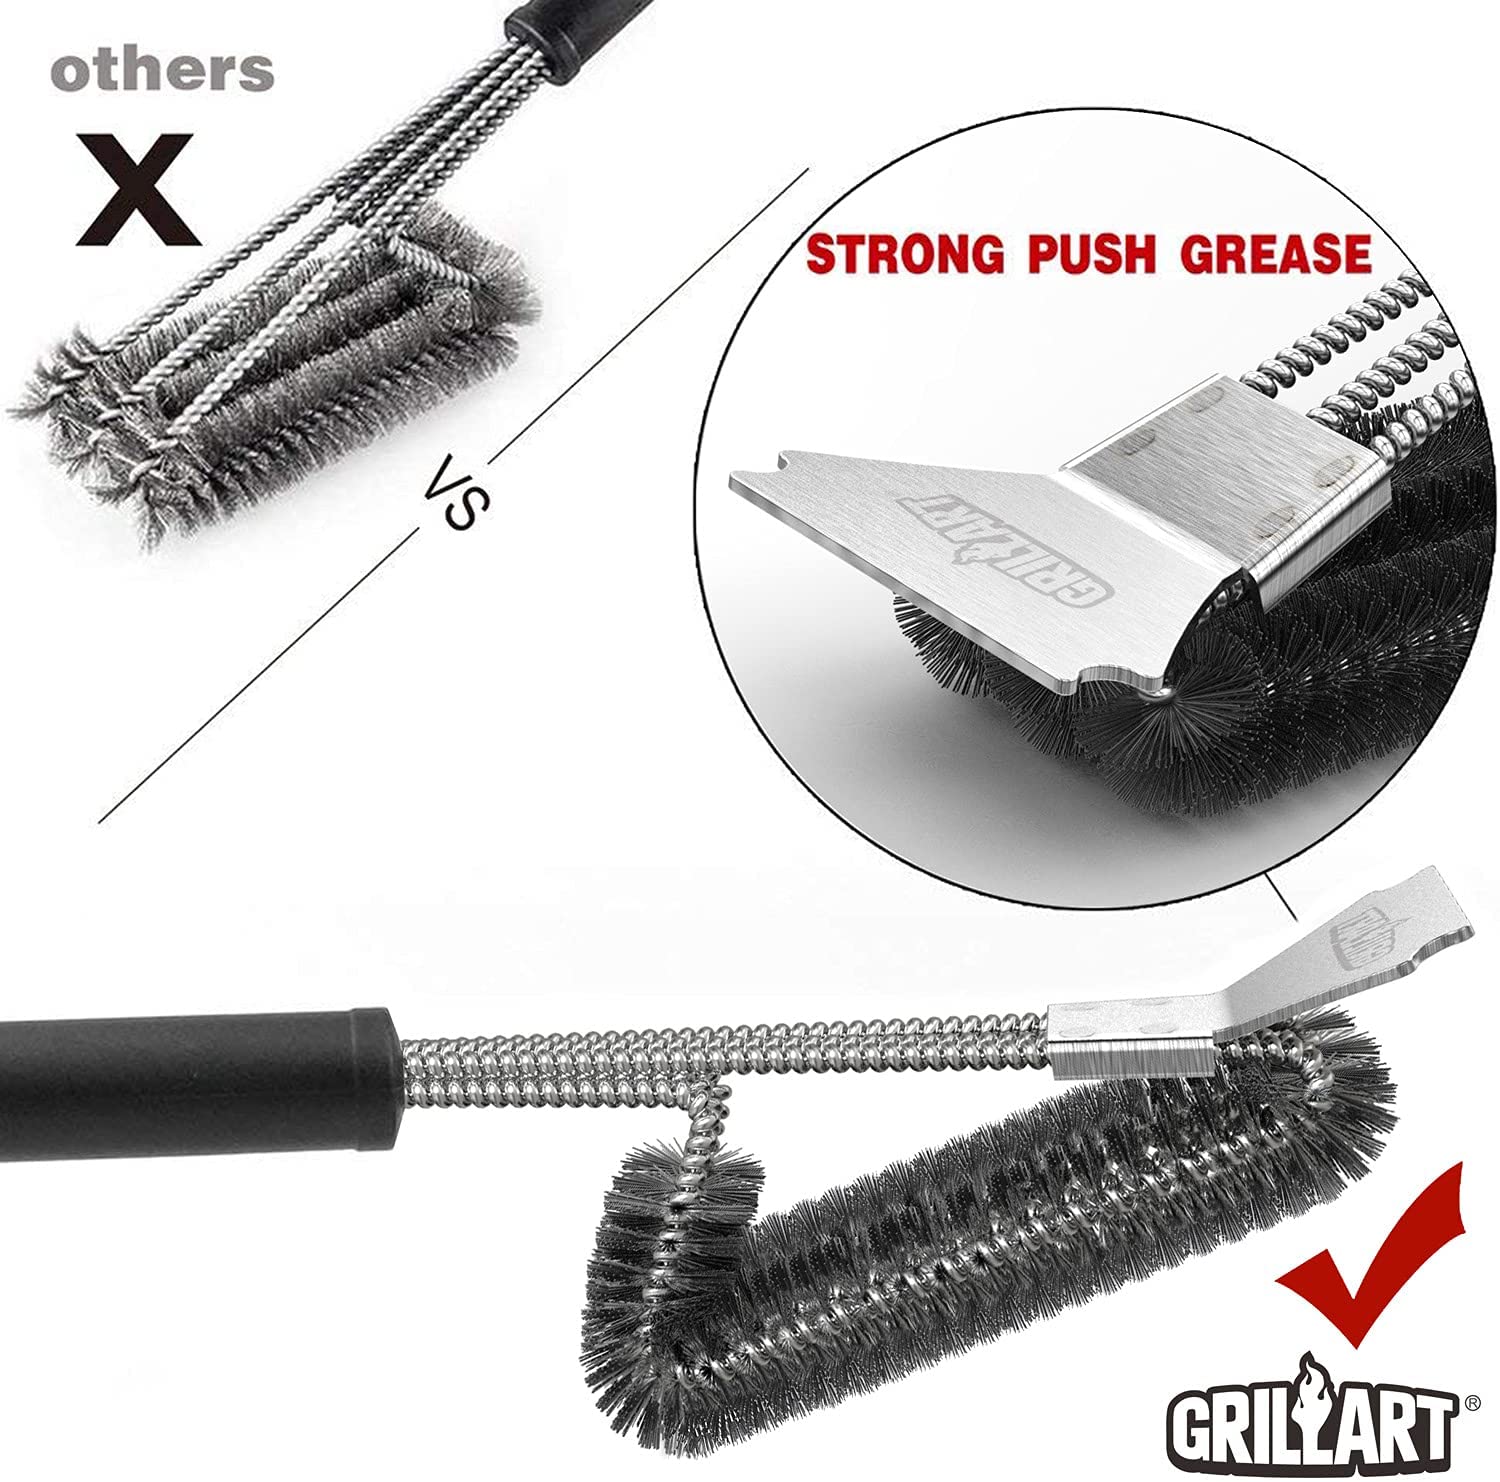 Stainless Steel Grill Scraper- Bbq Grill Cleaner Tool With